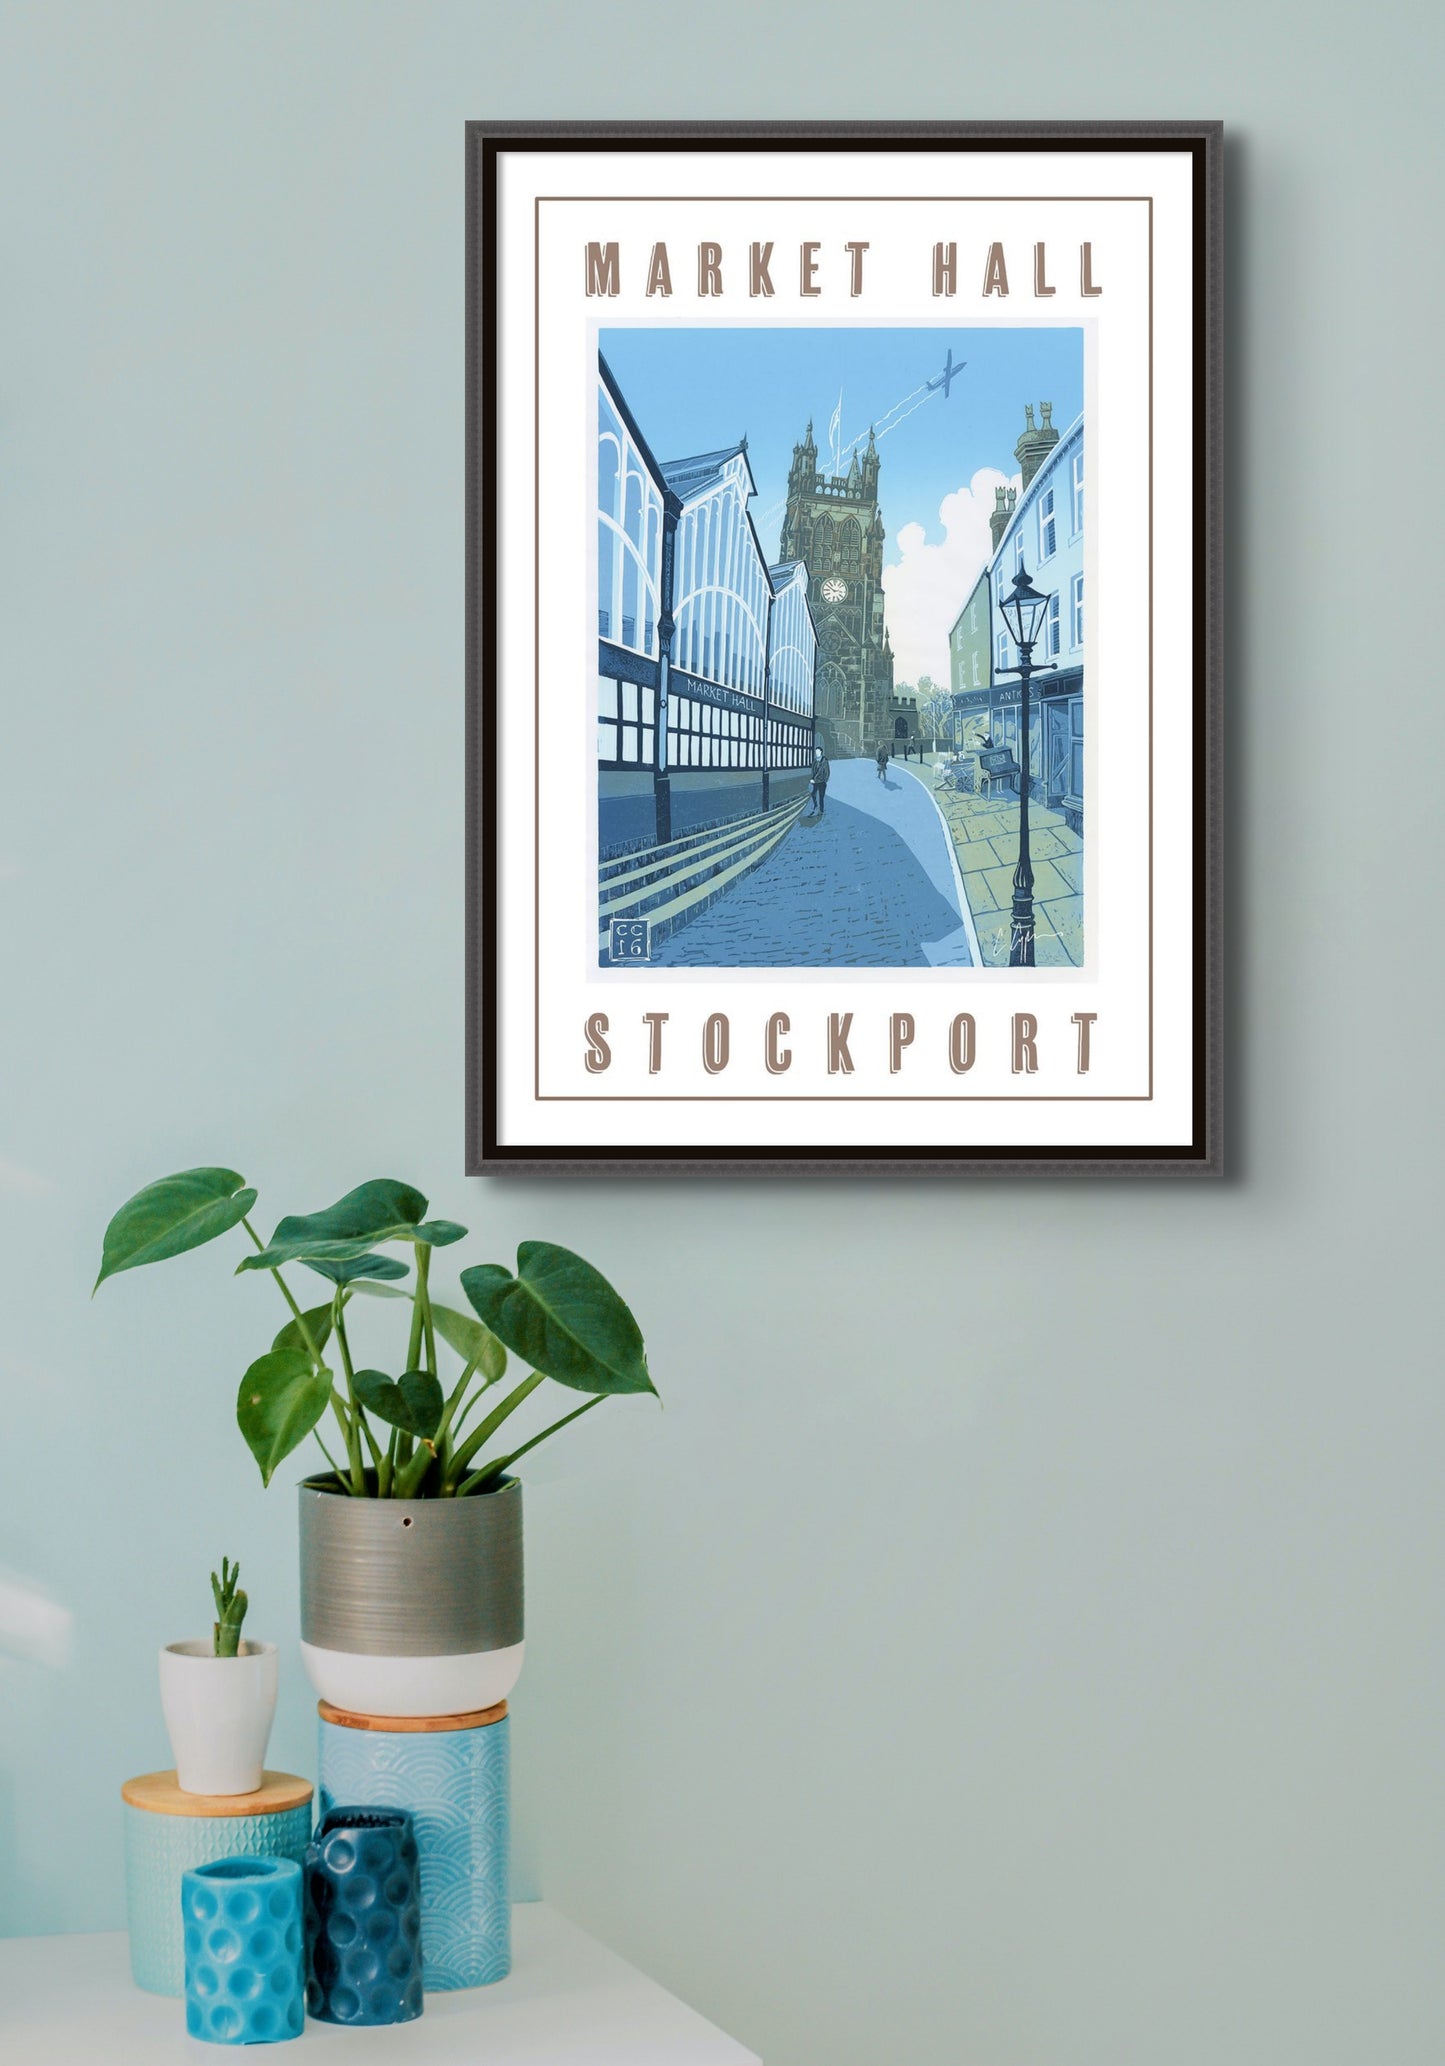 A beautiful reproduction poster of my 2016 linocut of Stockport Old Town, featuring the Market Hall and St. Mary's Parish Church          A2 size         Printed on 250gsm silk board paper - sustainably sourced         Tube rolled ideal for worldwide shipping. The image shows the poster framed and displayed 